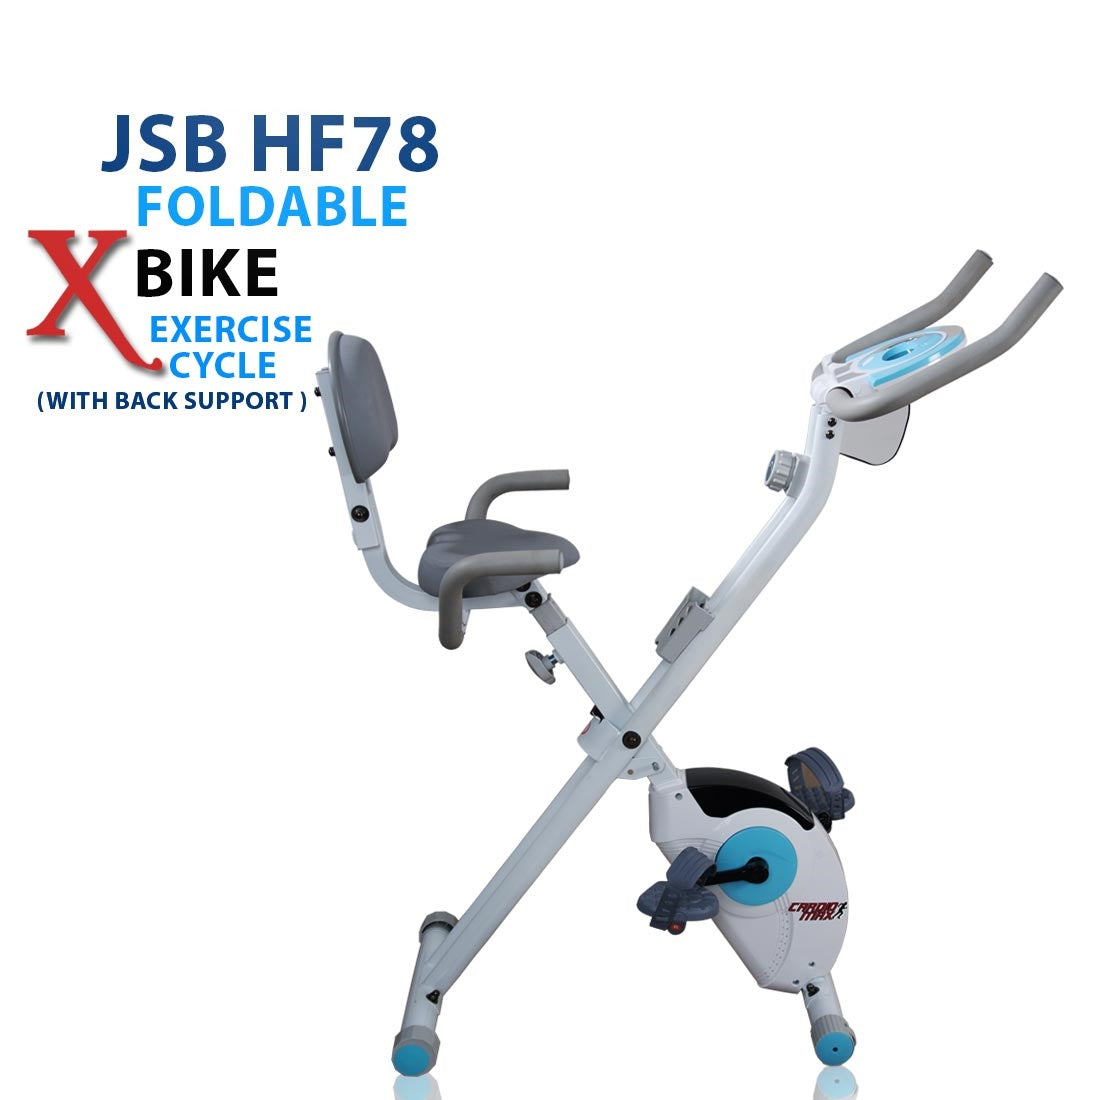 gym cycle for home jsb hf78